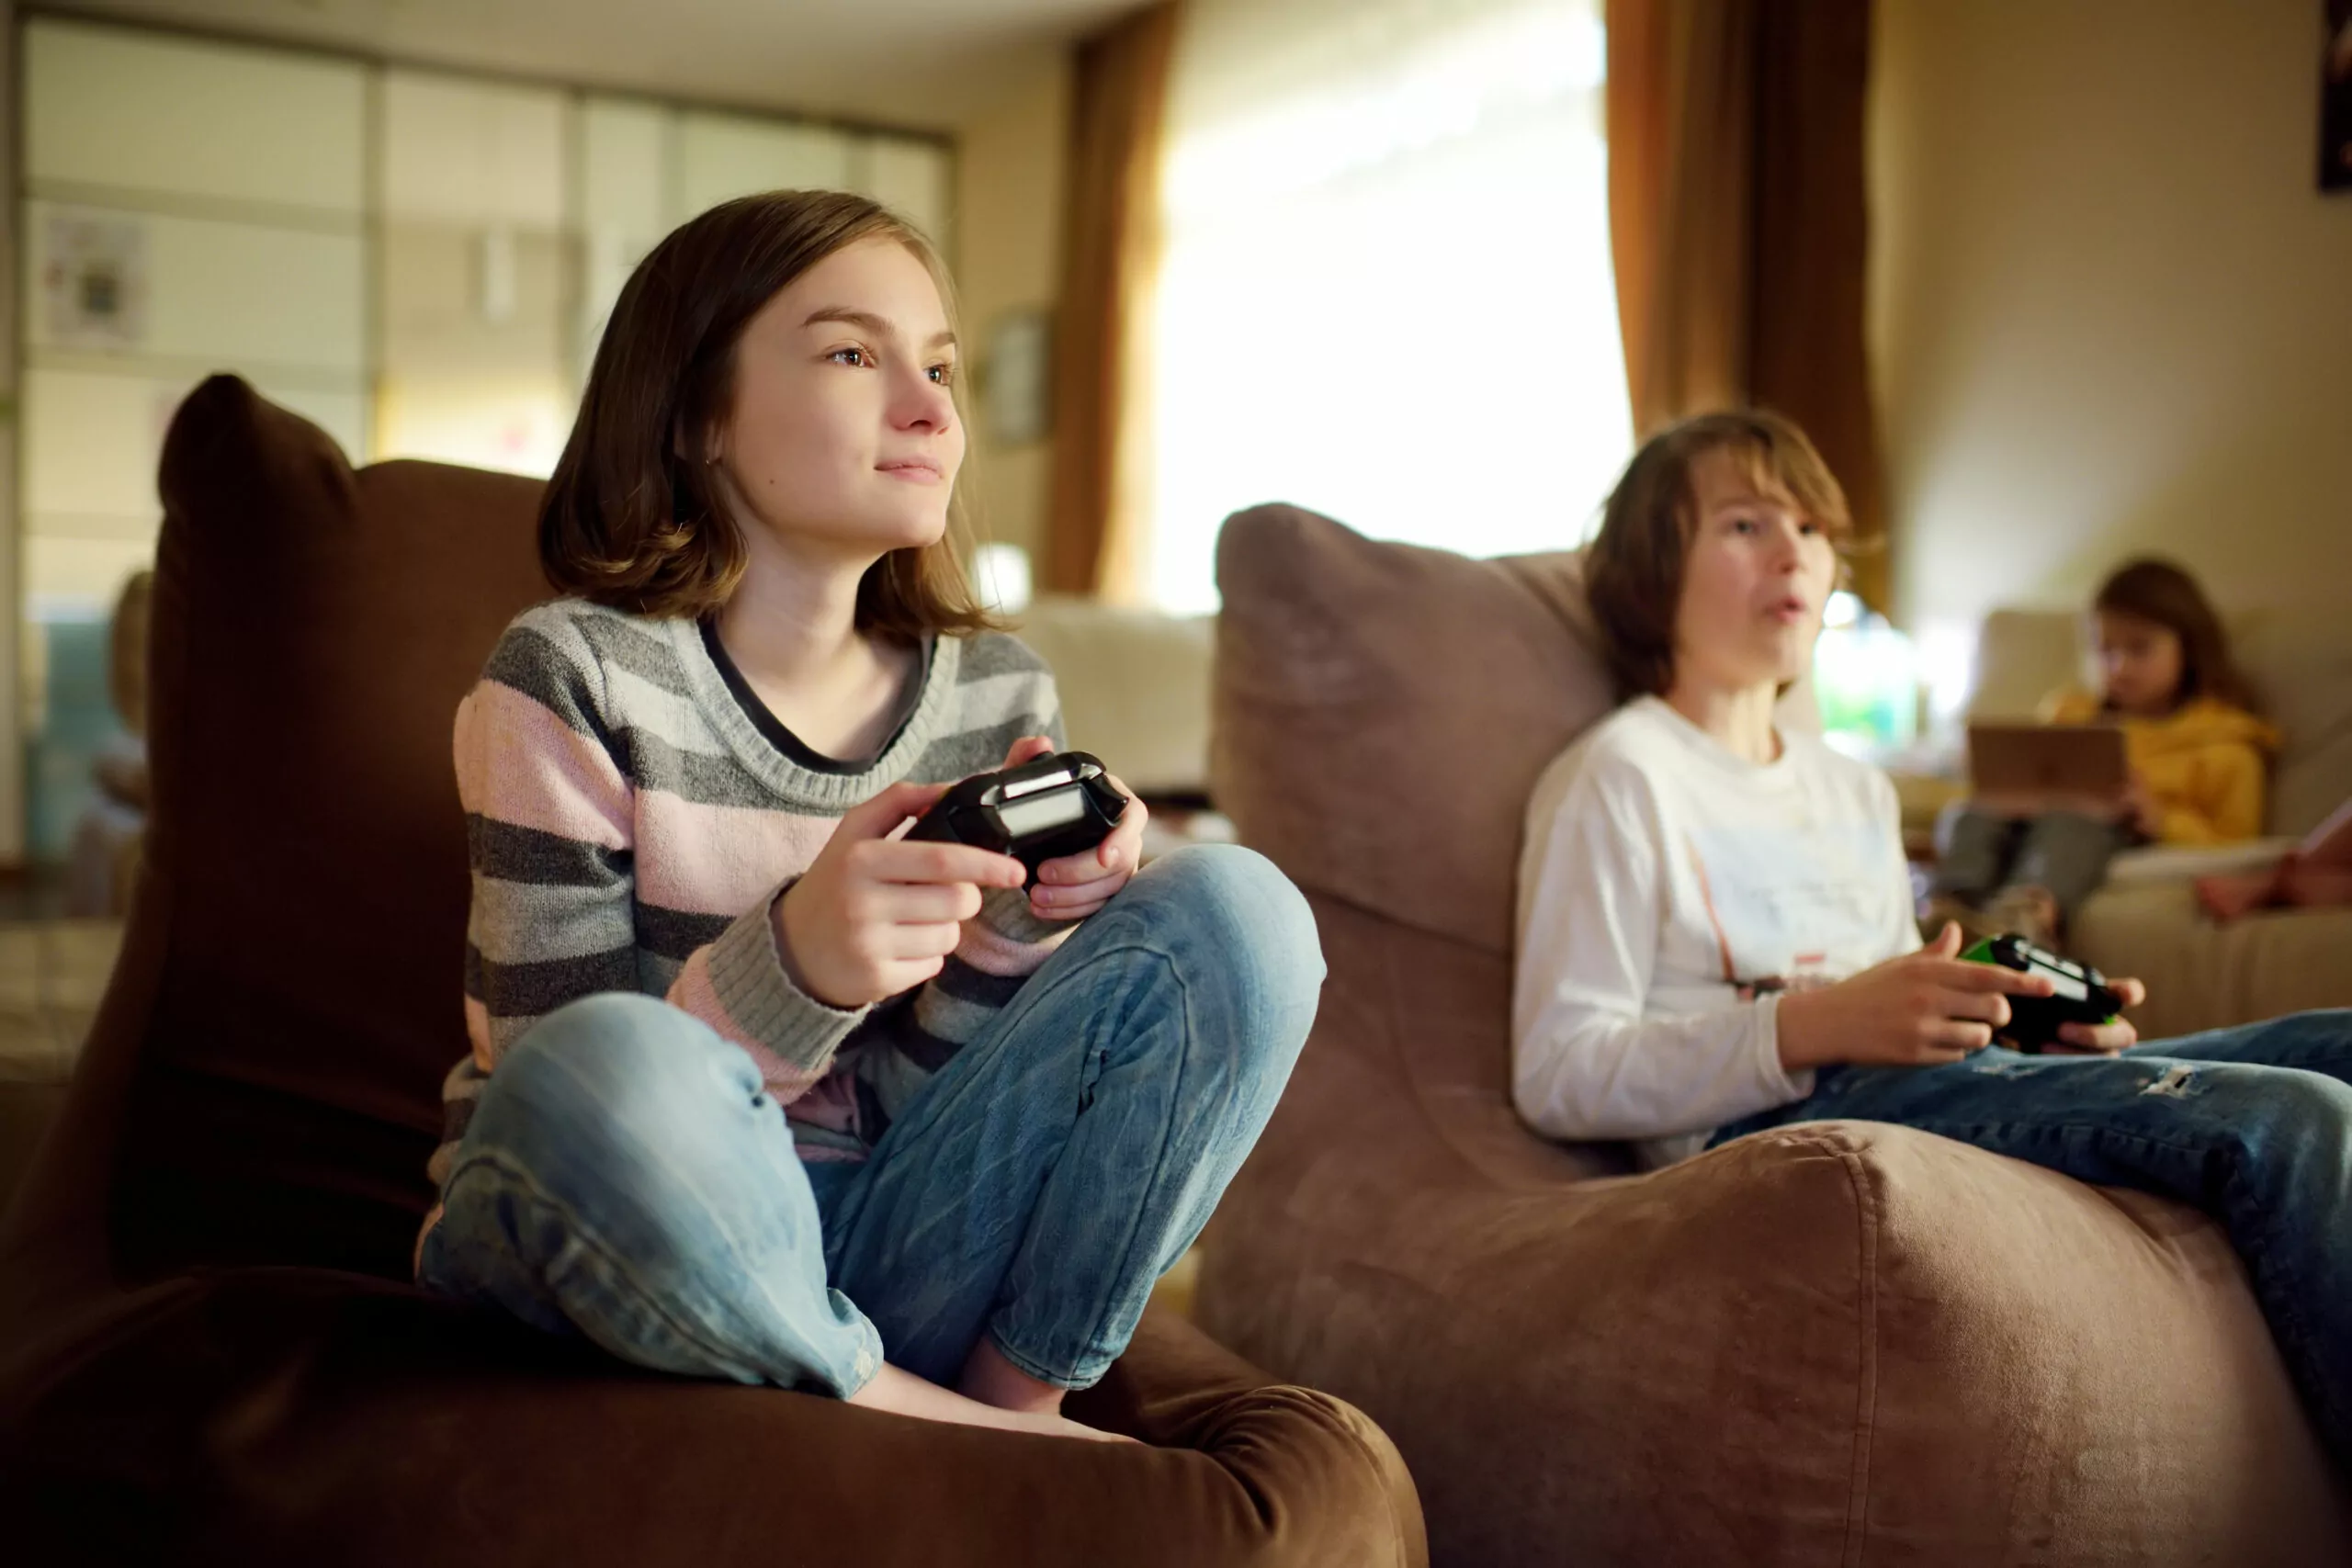 A group of preteen kids playing video games at home. Children sitting on the couch together holding gaming controllers.